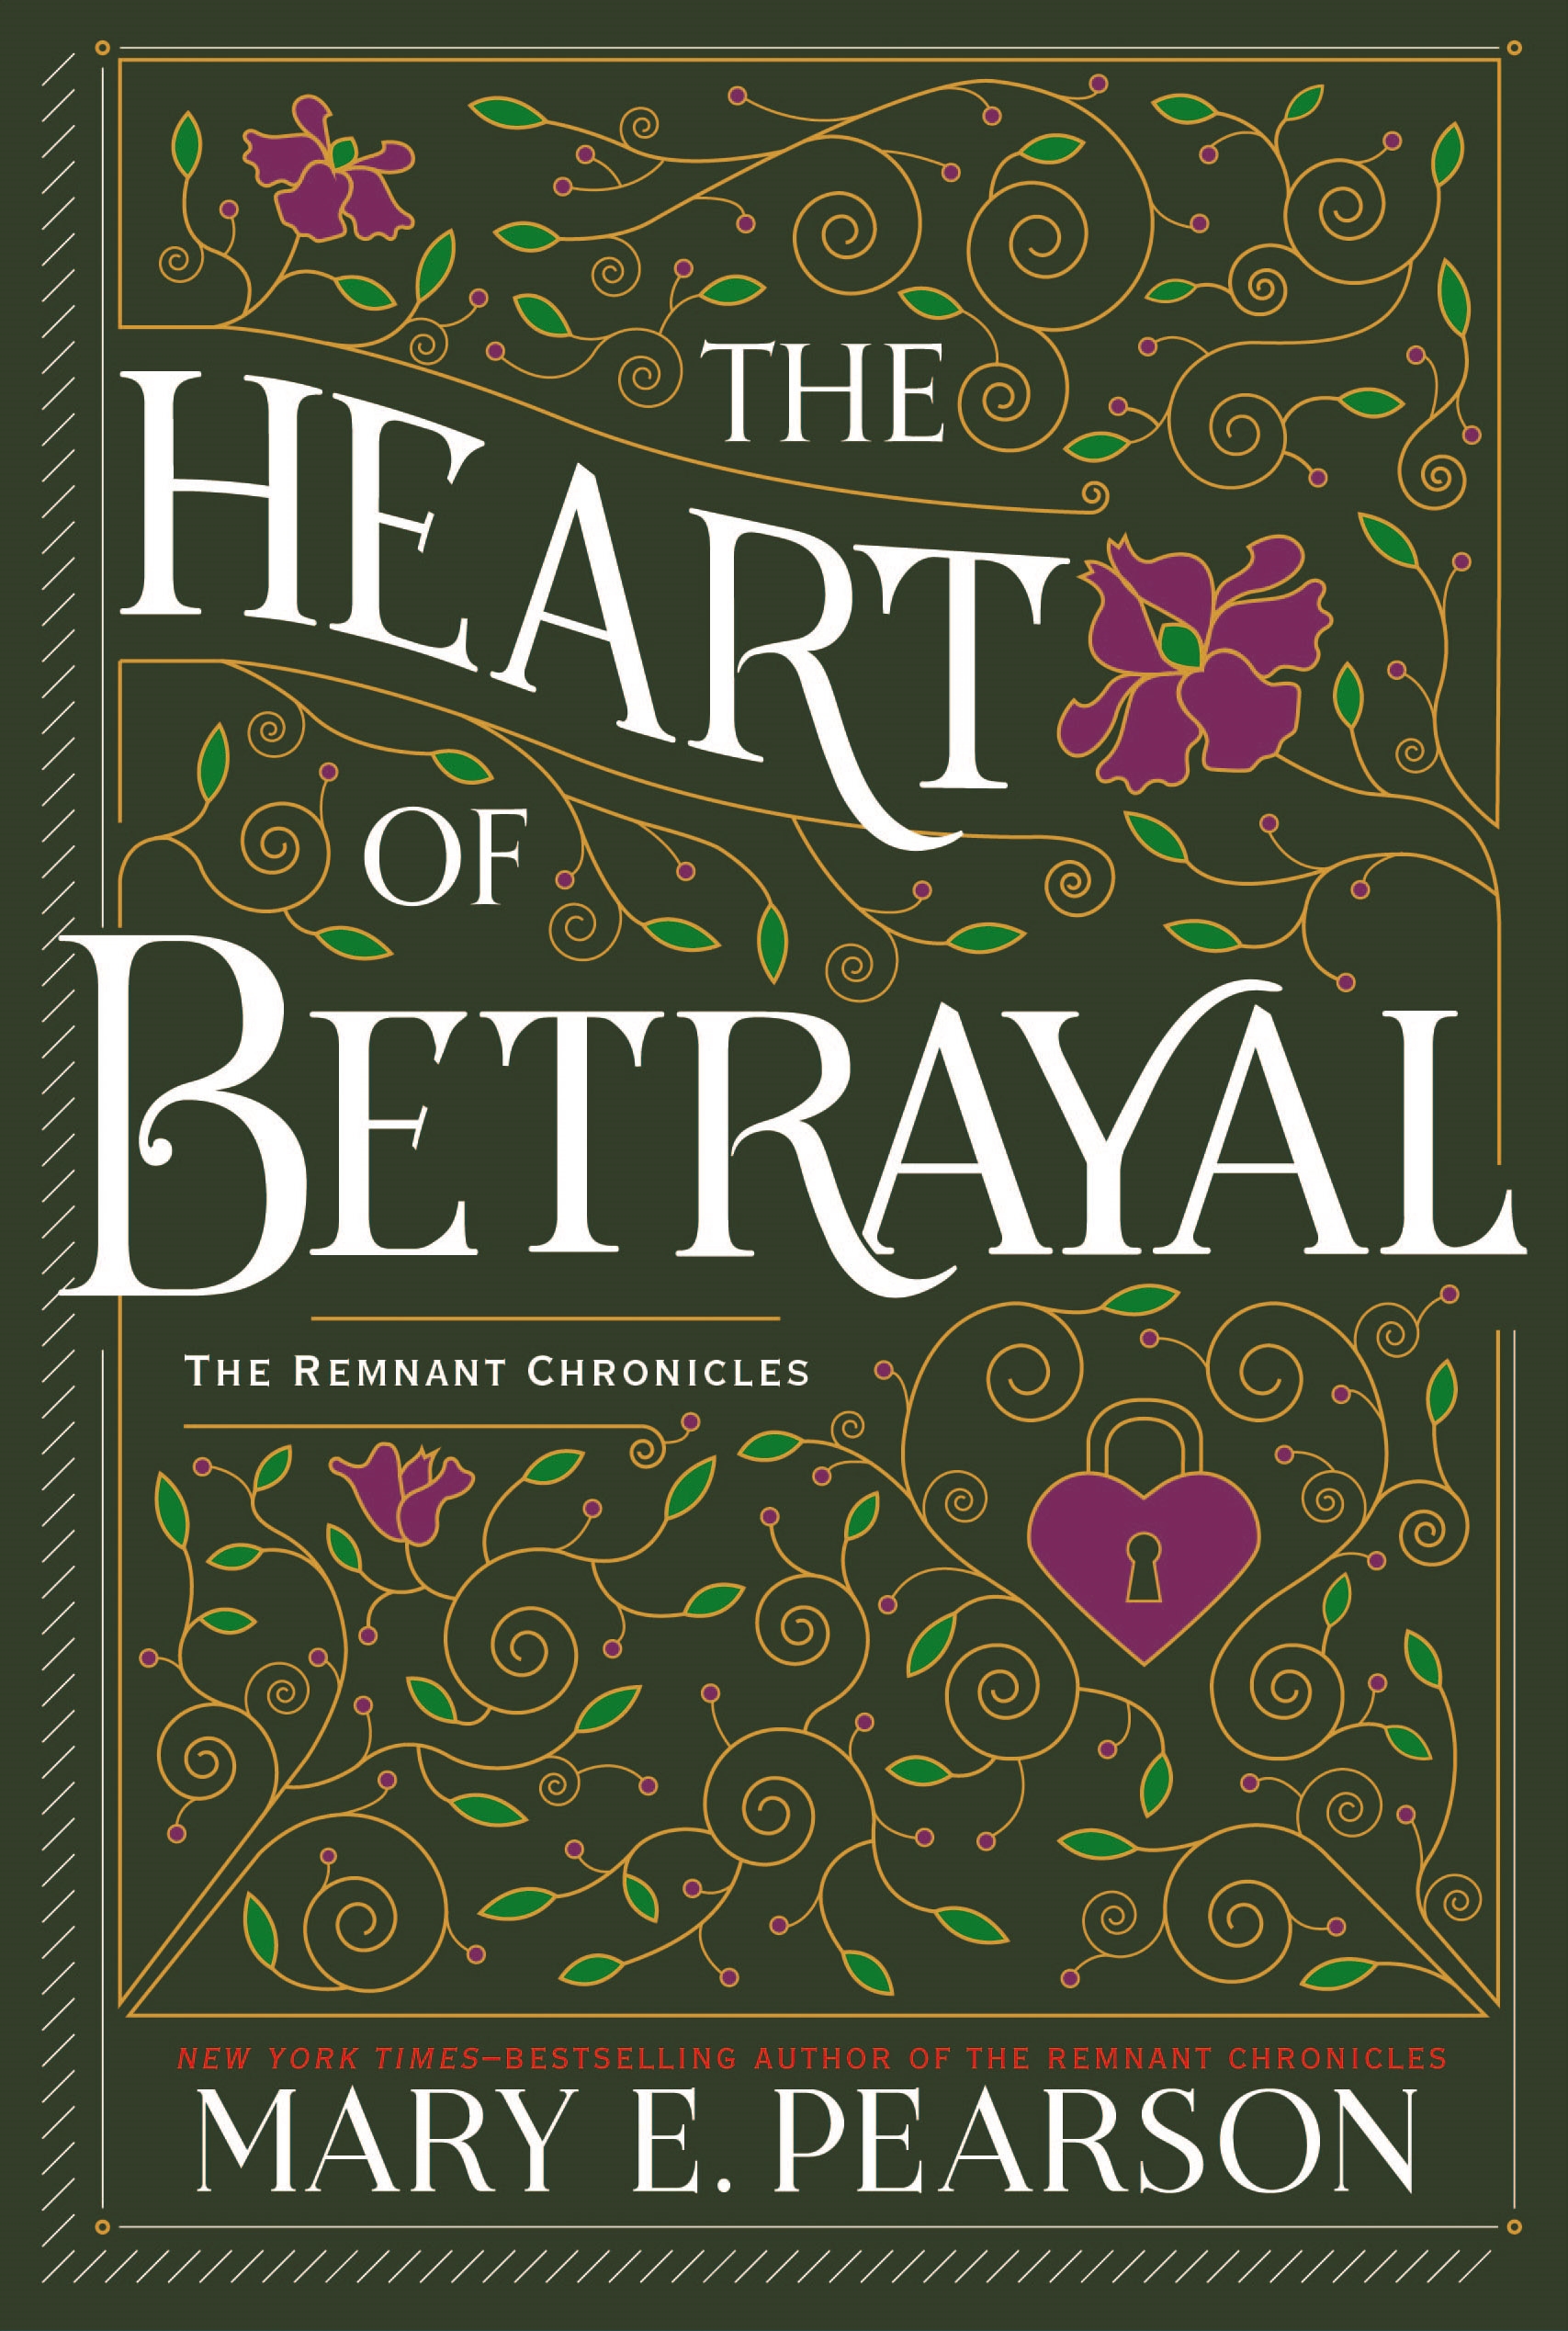 The Heart of Betrayal The Remnant Chronicles, Book Two cover image